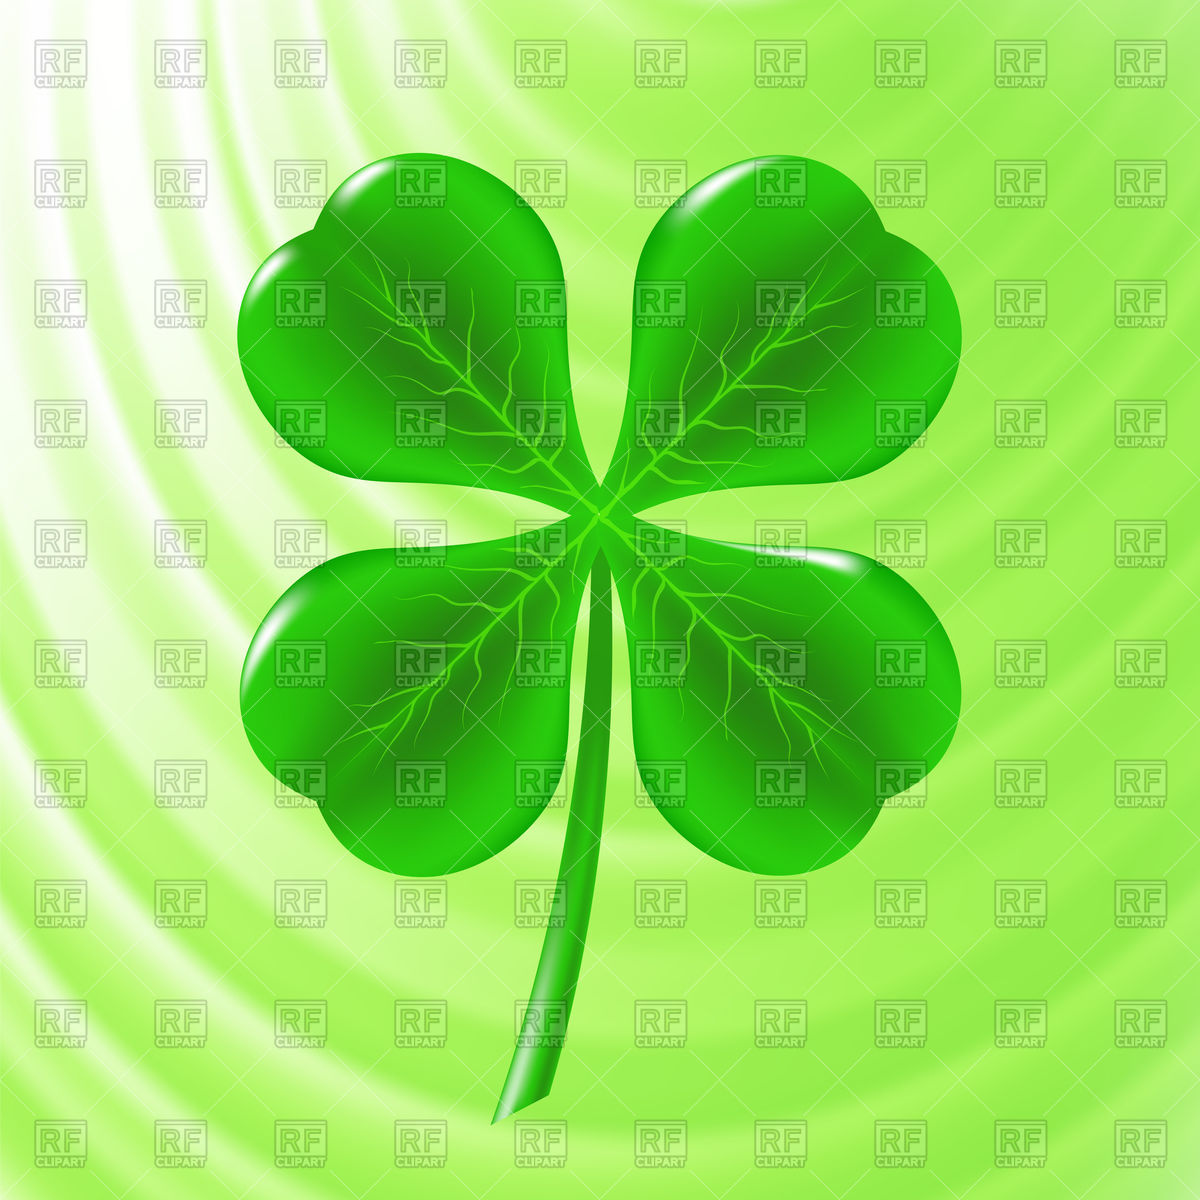 Green Clover Icon 84664 Download Royalty Free Vector Clipart  Eps